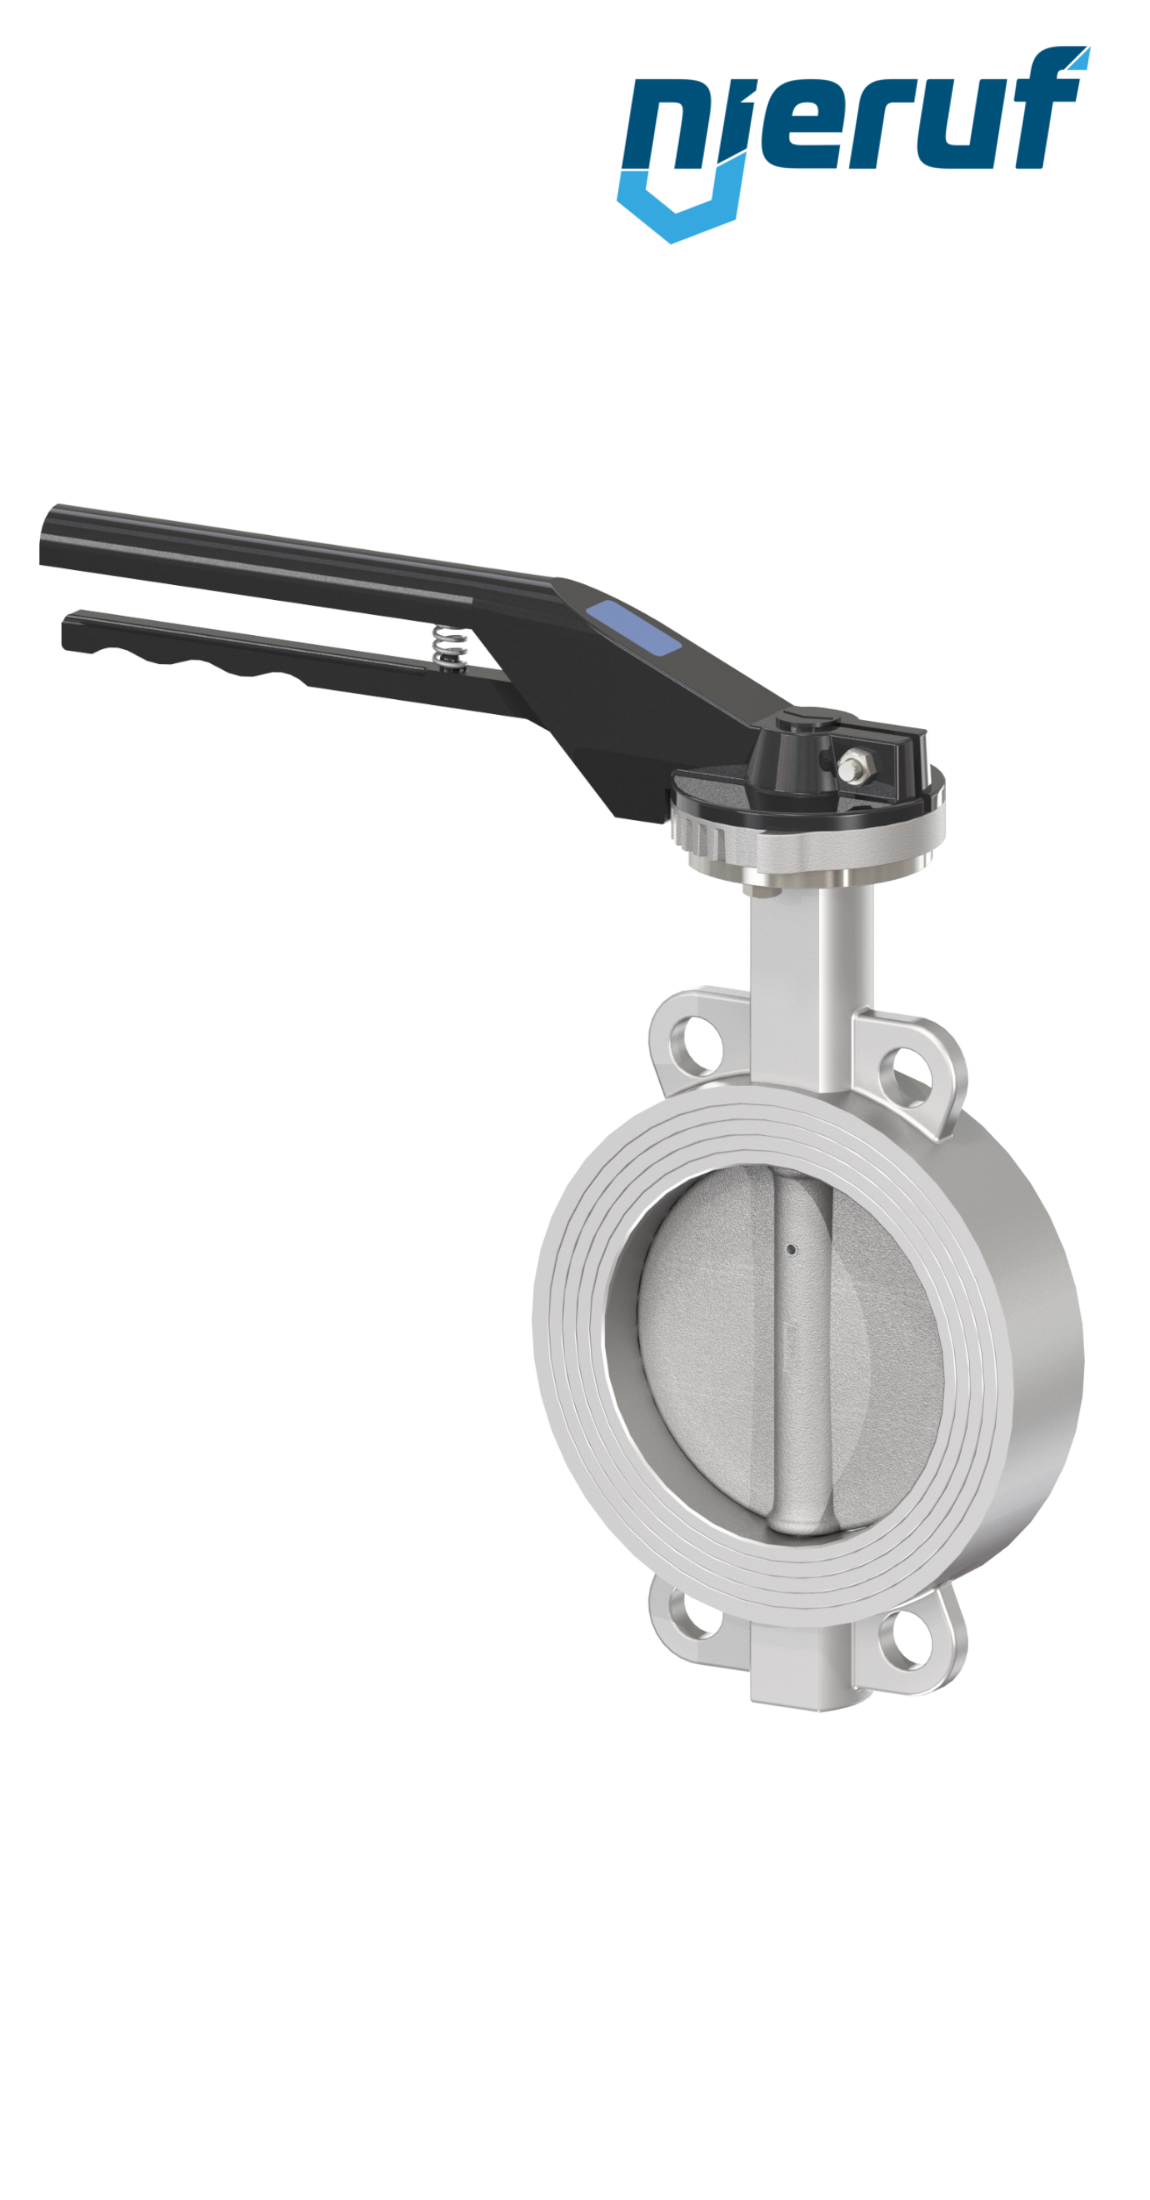 Butterfly-valve-stainless-steel DN 200 PN16 AK08 metall notch lever